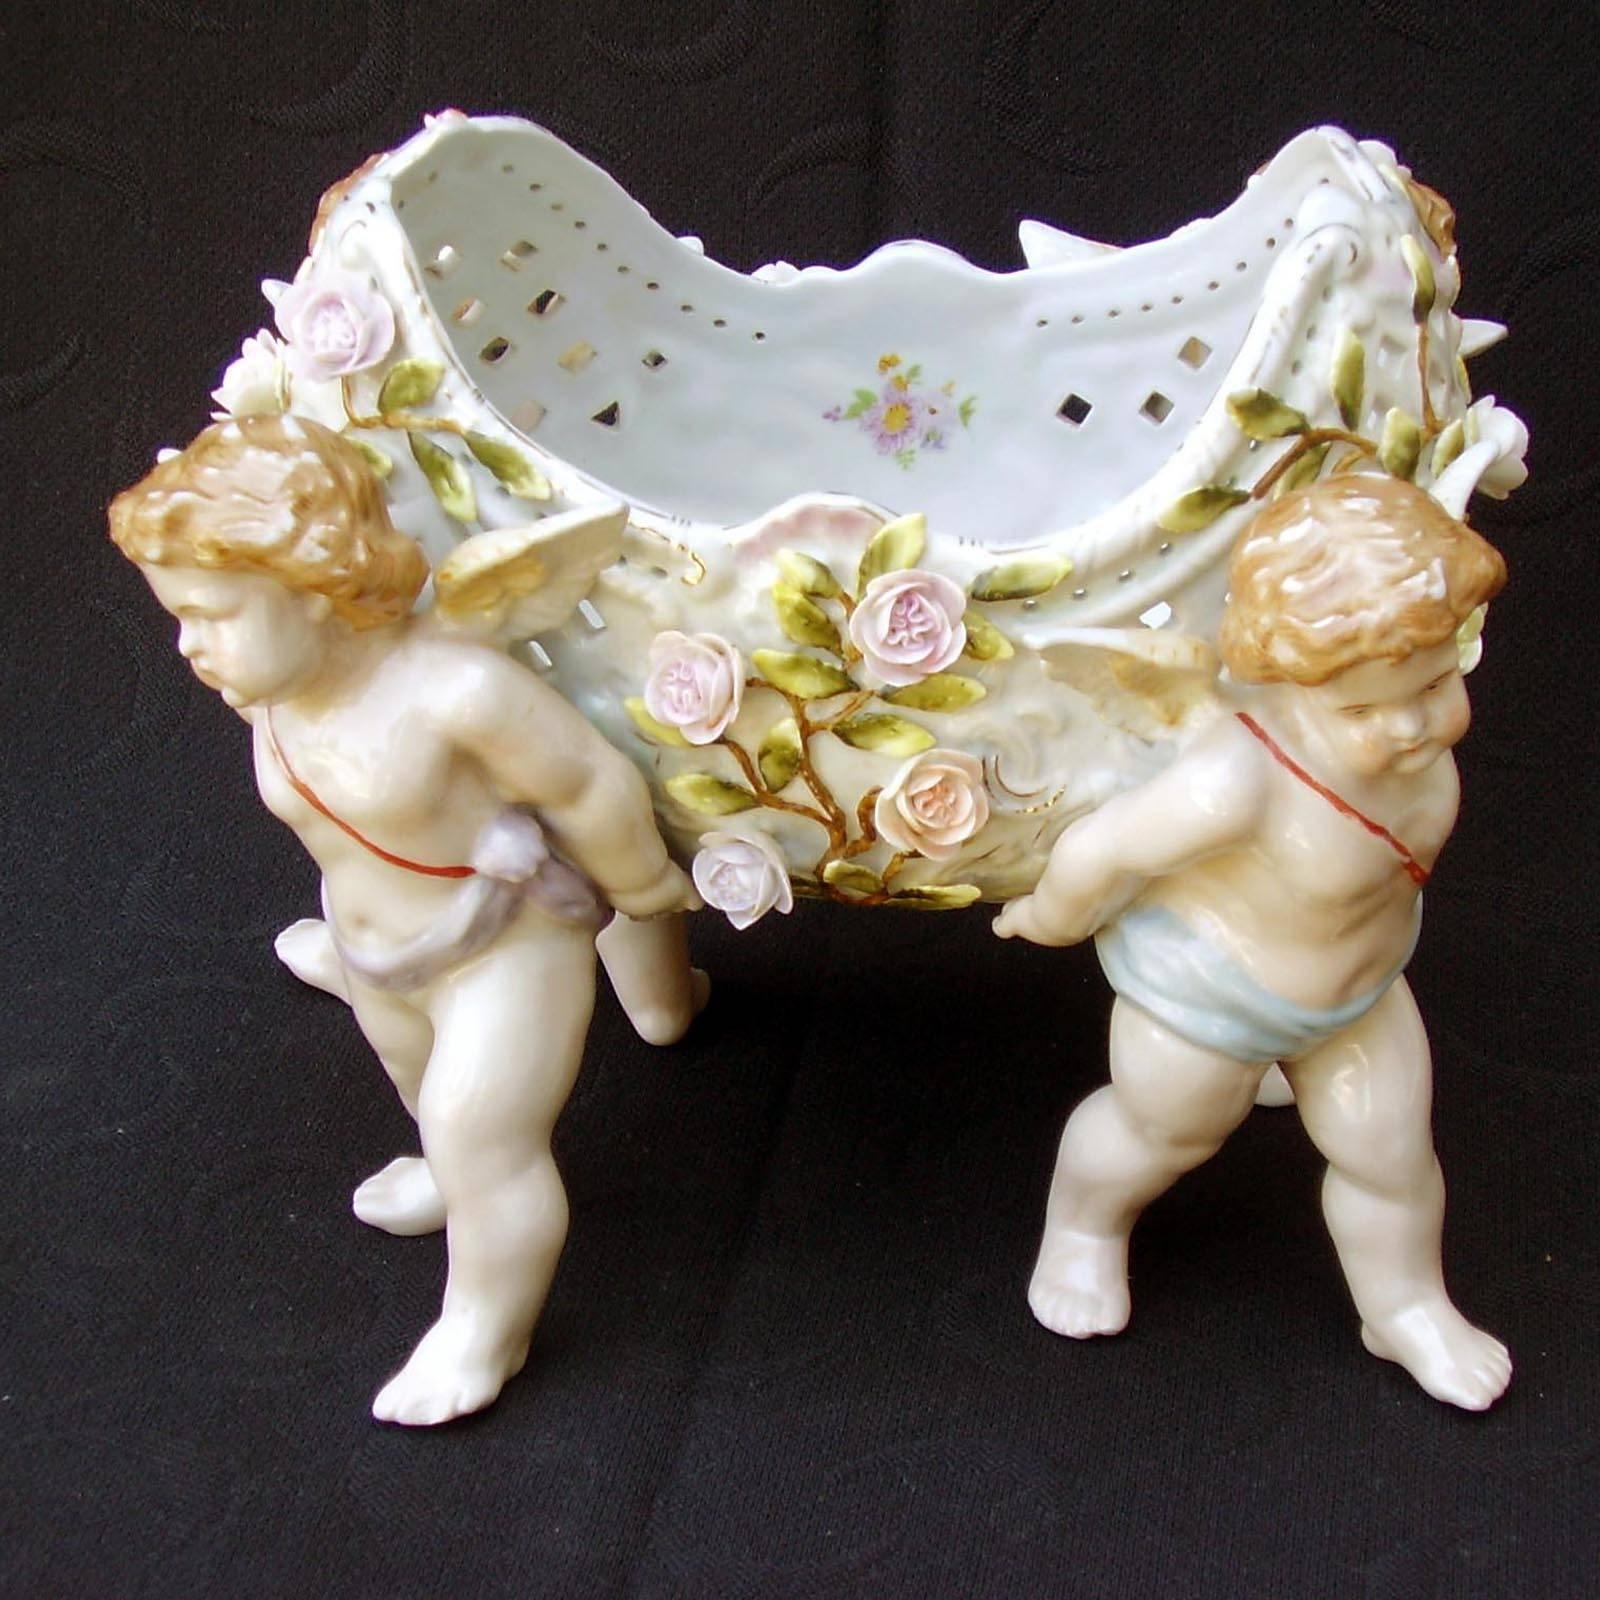 This item is a big 19th century Viennese porcelain centerpiece bowl or jardinière beautifully enameled in rich colors with floral sprays and gilt highlights. This stunning Rococo piece heavily attributable to Meissen also features rose flower in